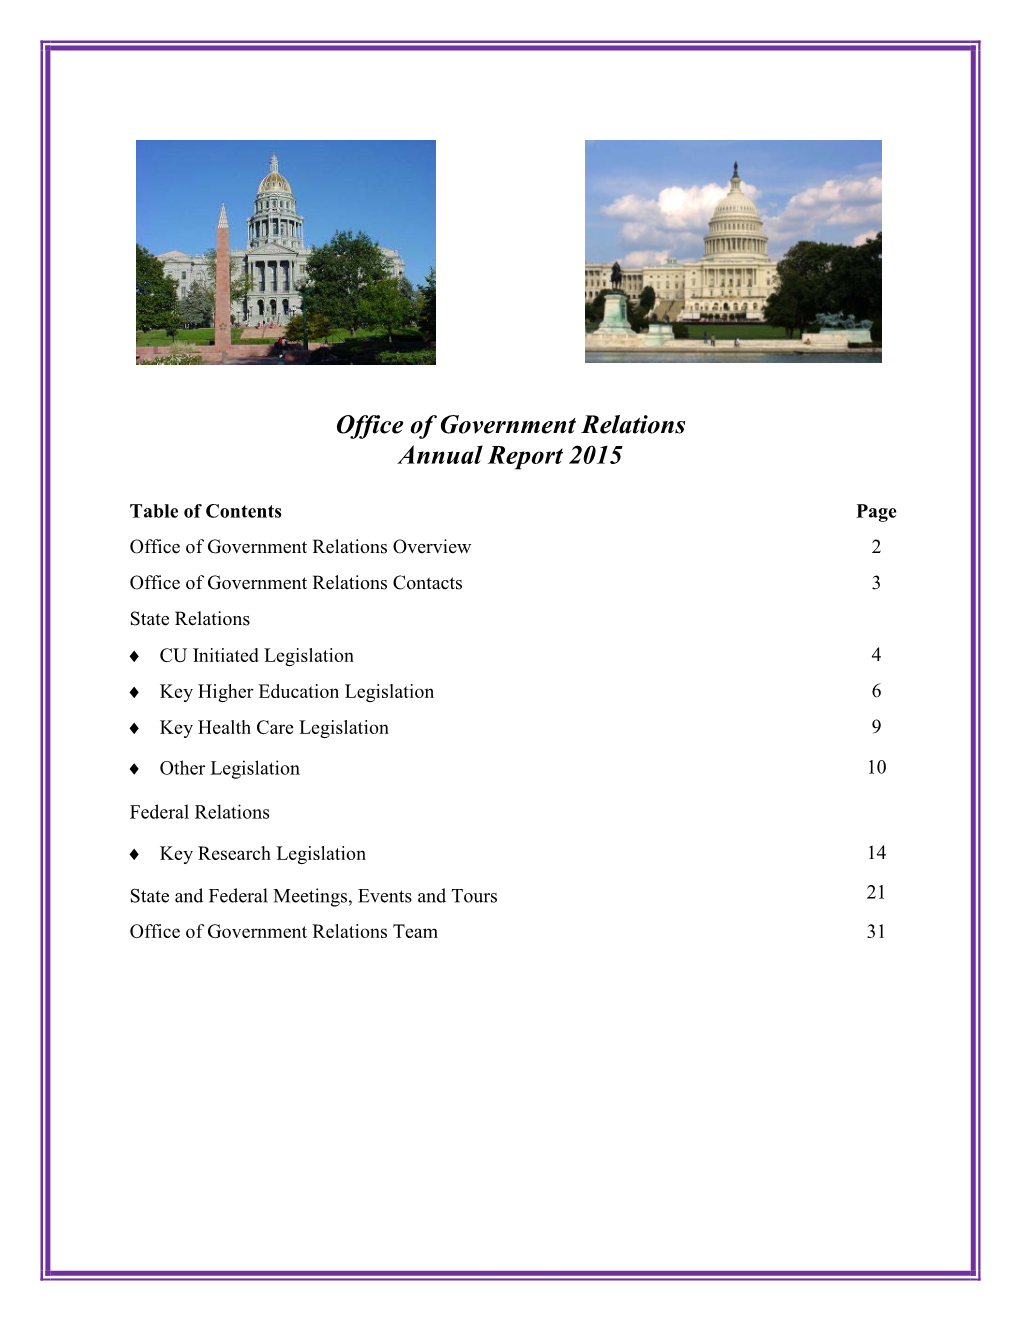 Office of Government Relations Annual Report 2015